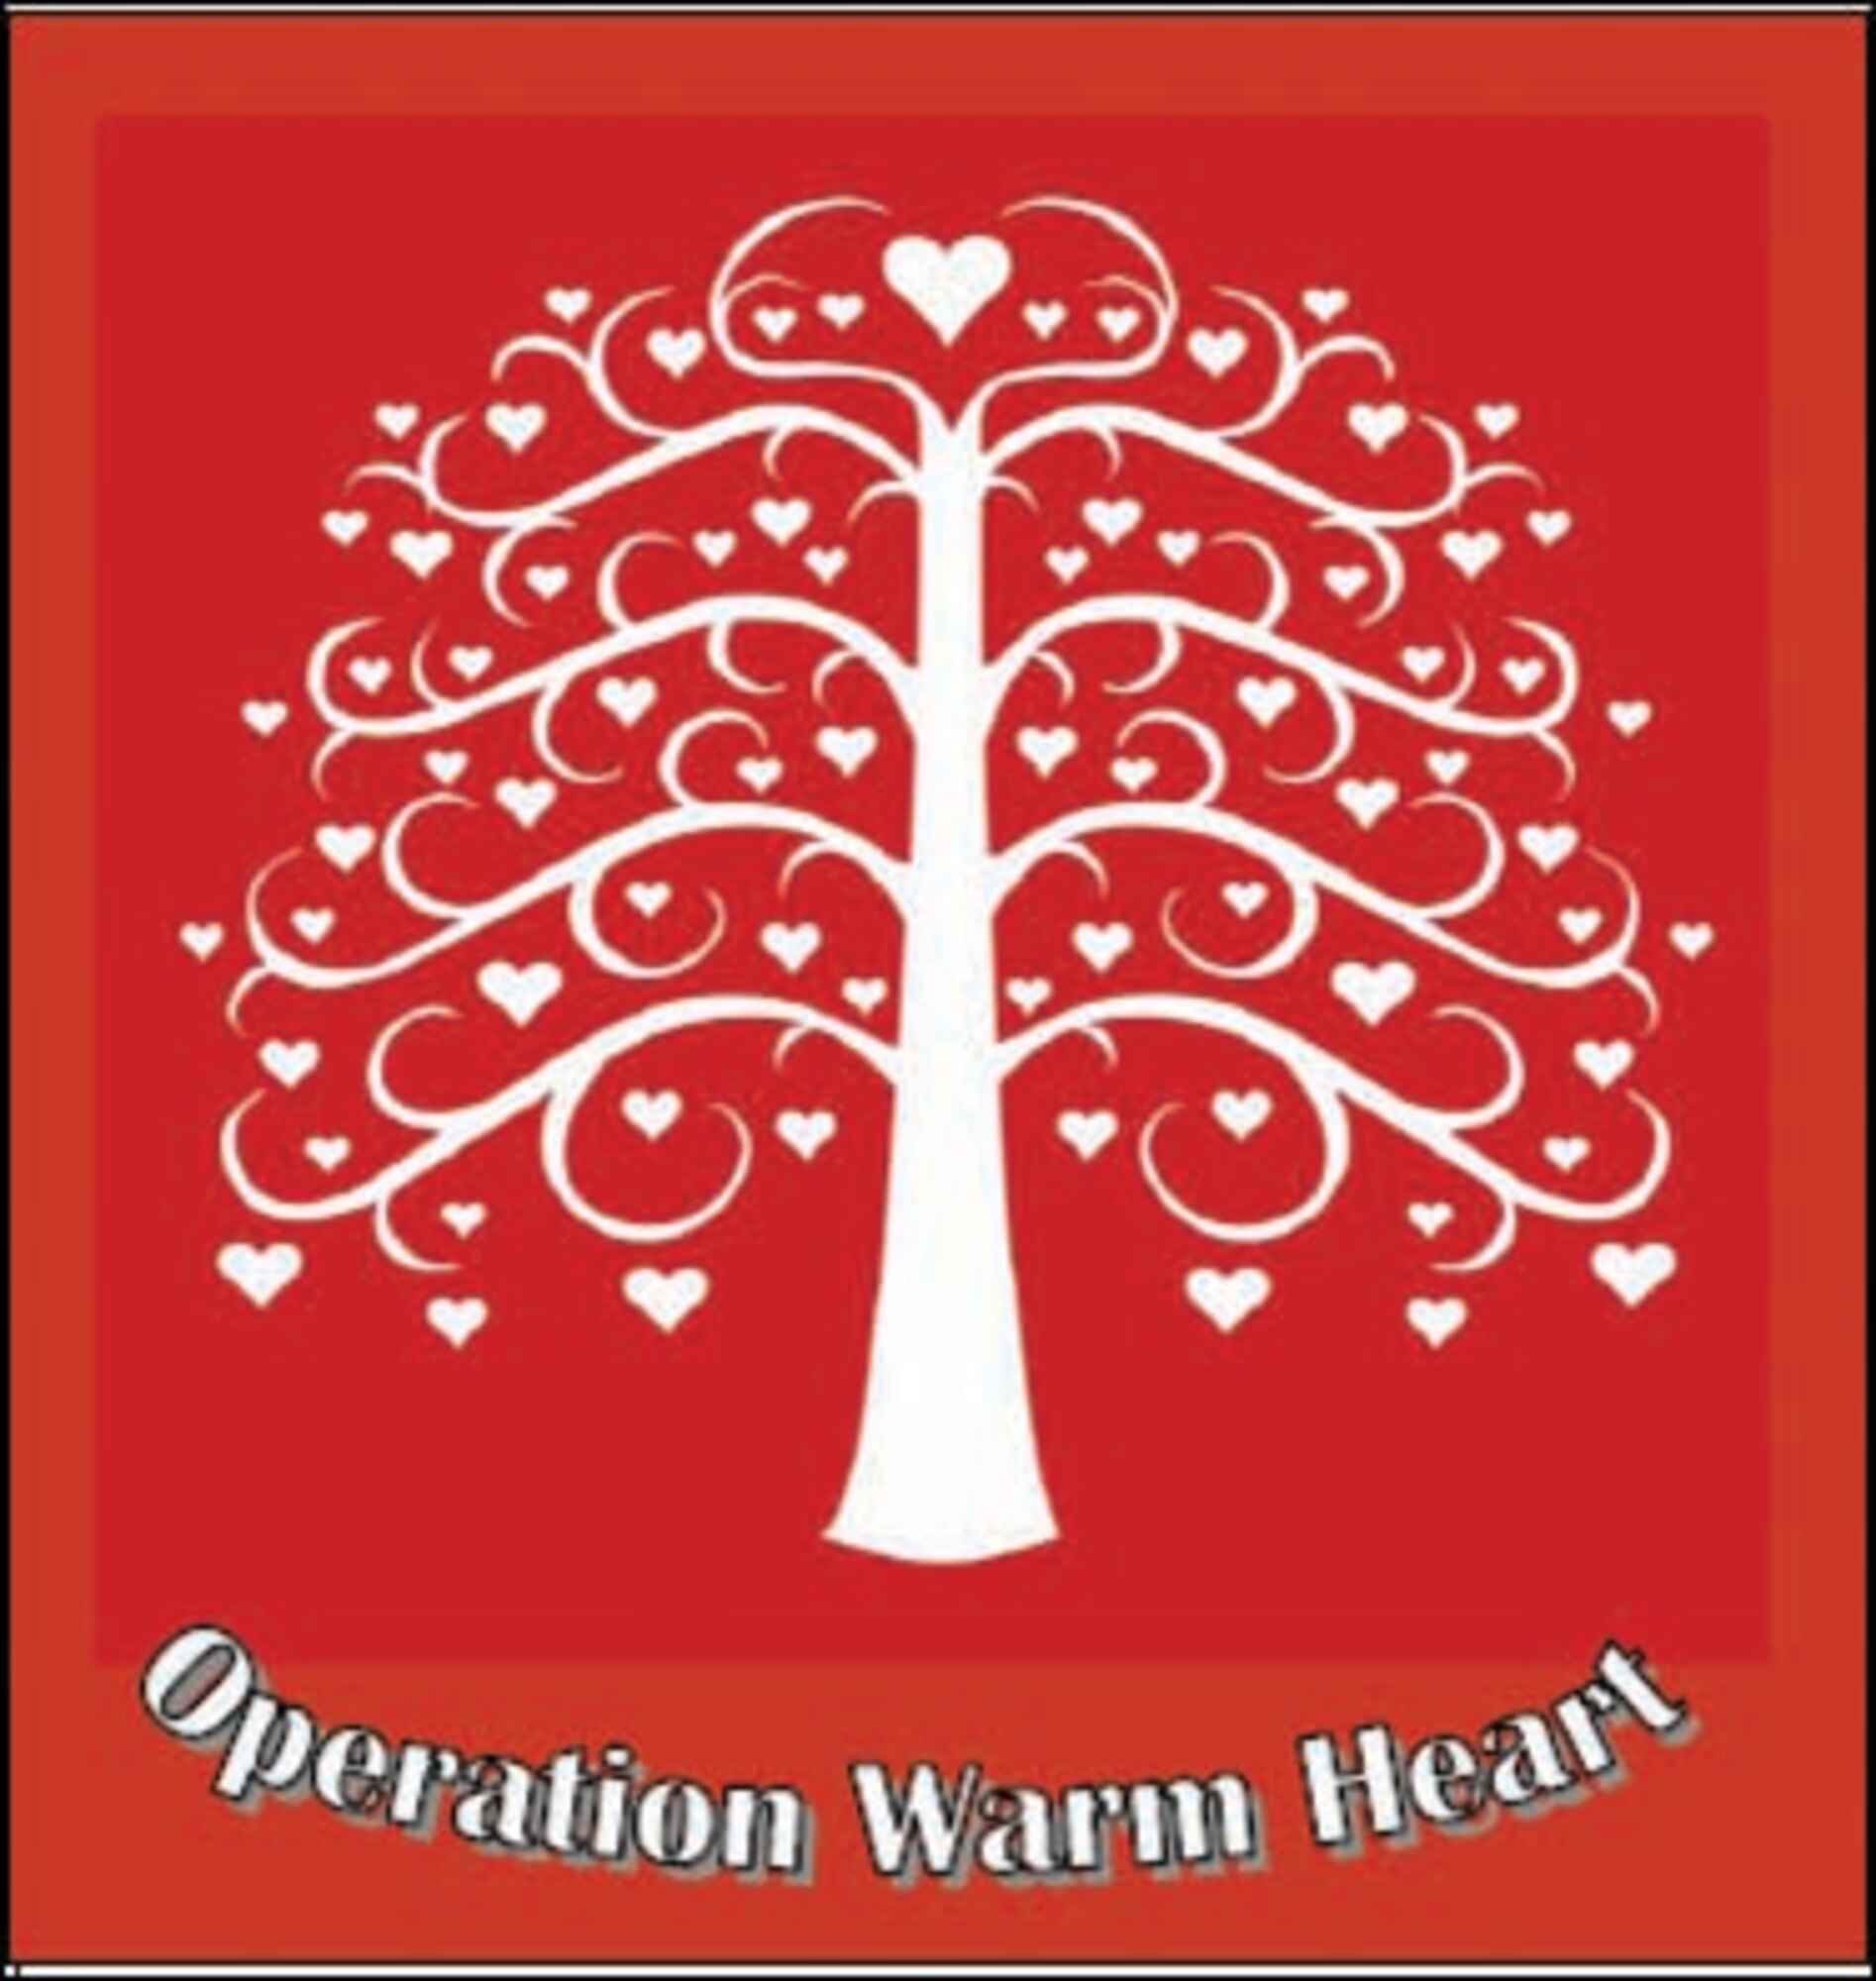 Operation Warm Heart  is an anonymous team of 'elves' who lighten the burdens of March Air Reserve Base families in need by giving holiday baskets filled with donated items.